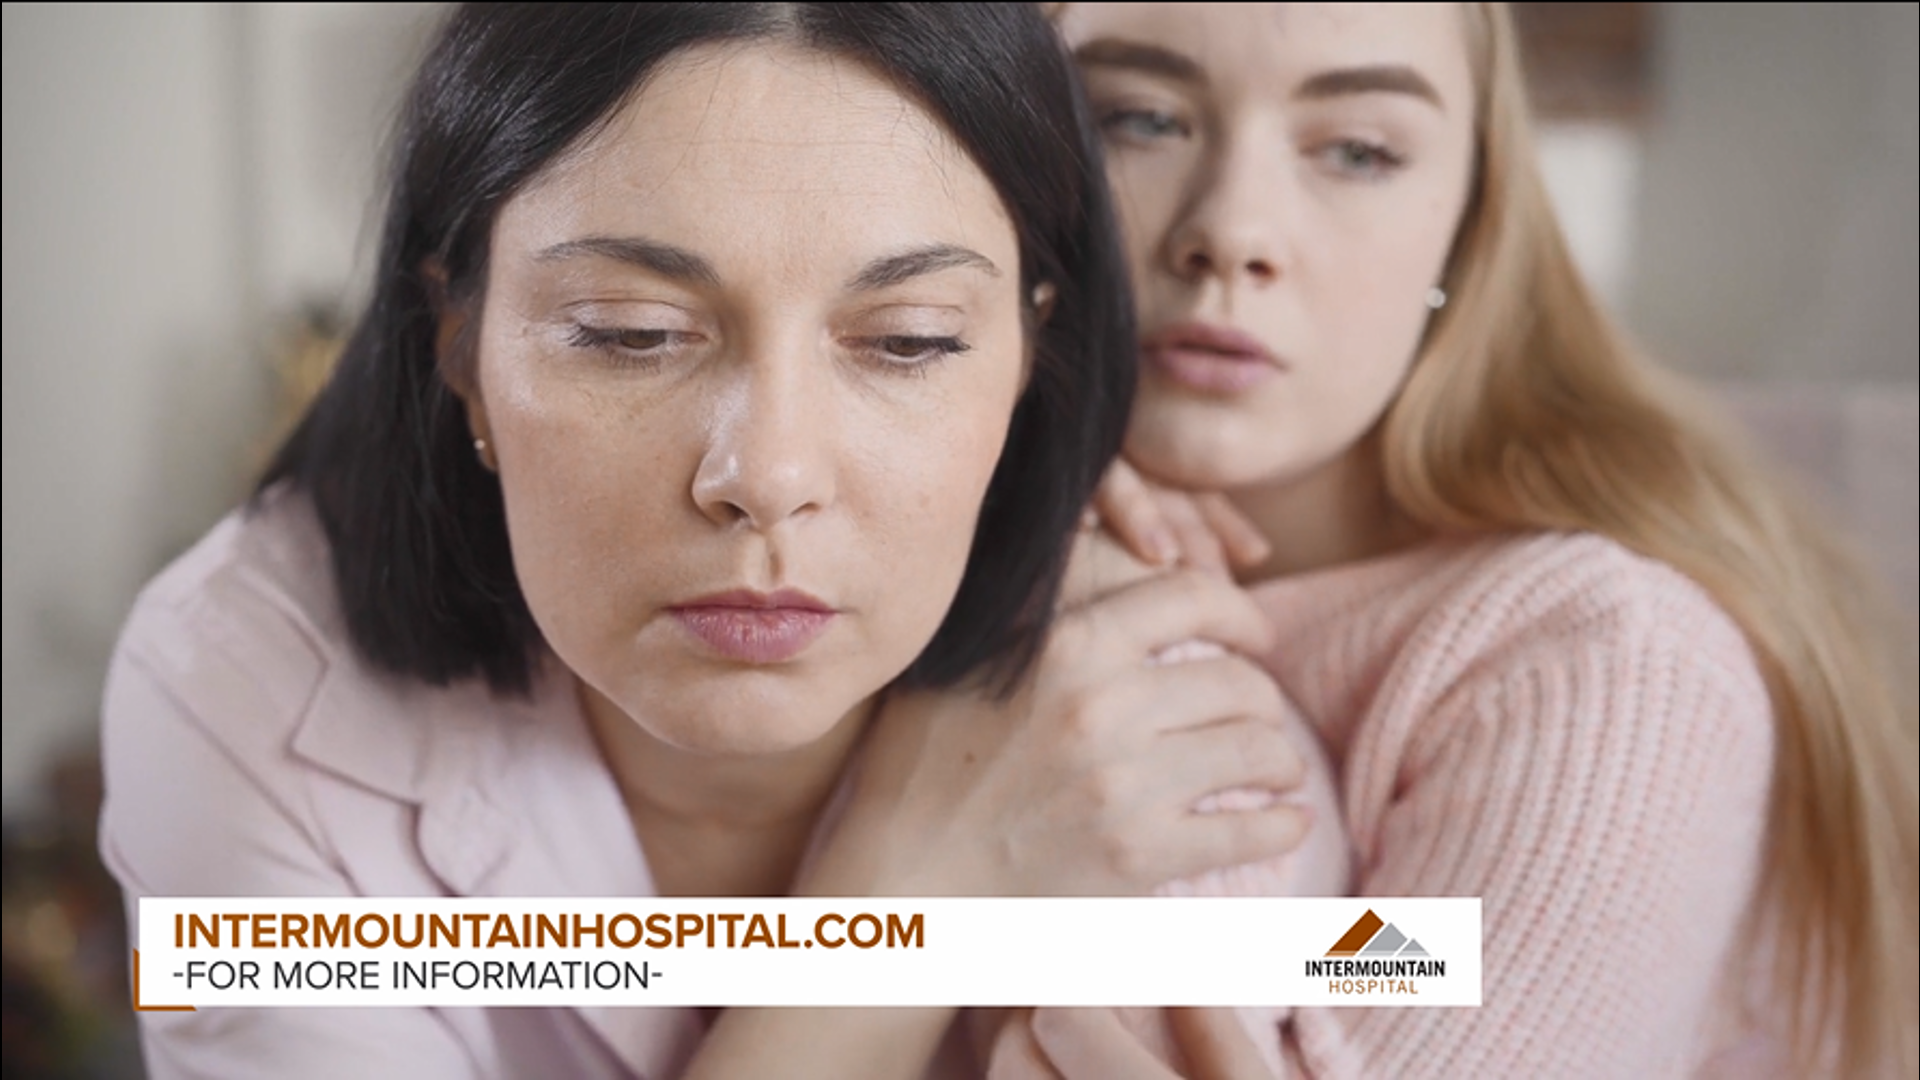 The New Start program provides hope for healing from addiction. Gina Pratt & April Thorndyke from Intermountain Hospital help us understand how the program works.